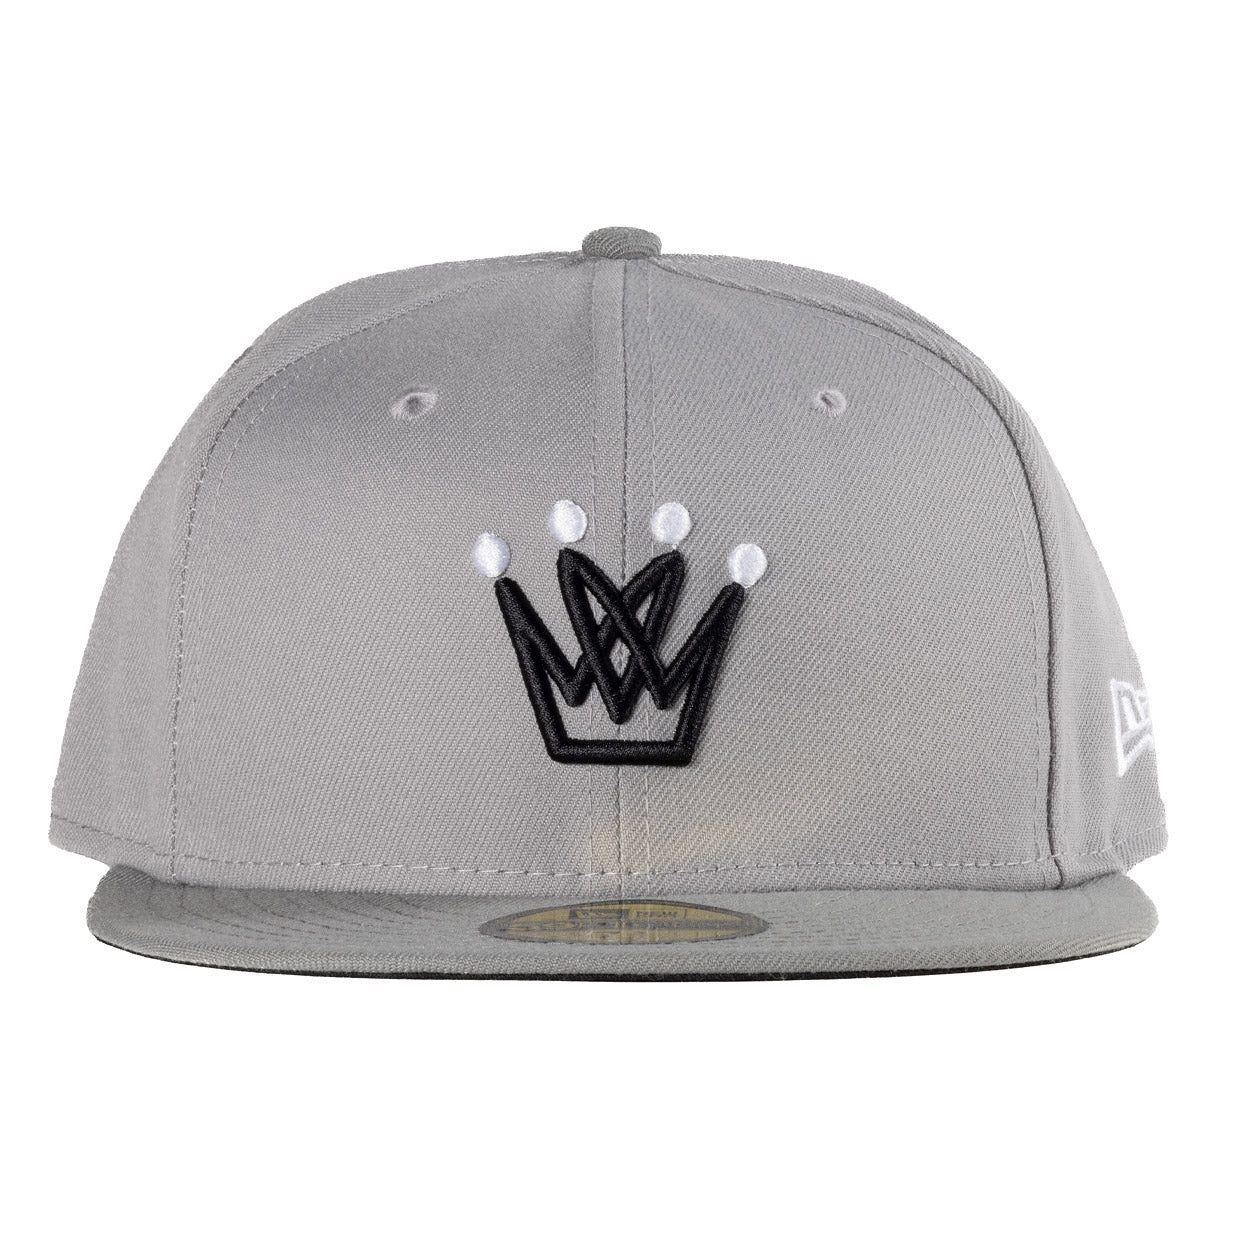 King of Hearts Grayscale New Era Fitted